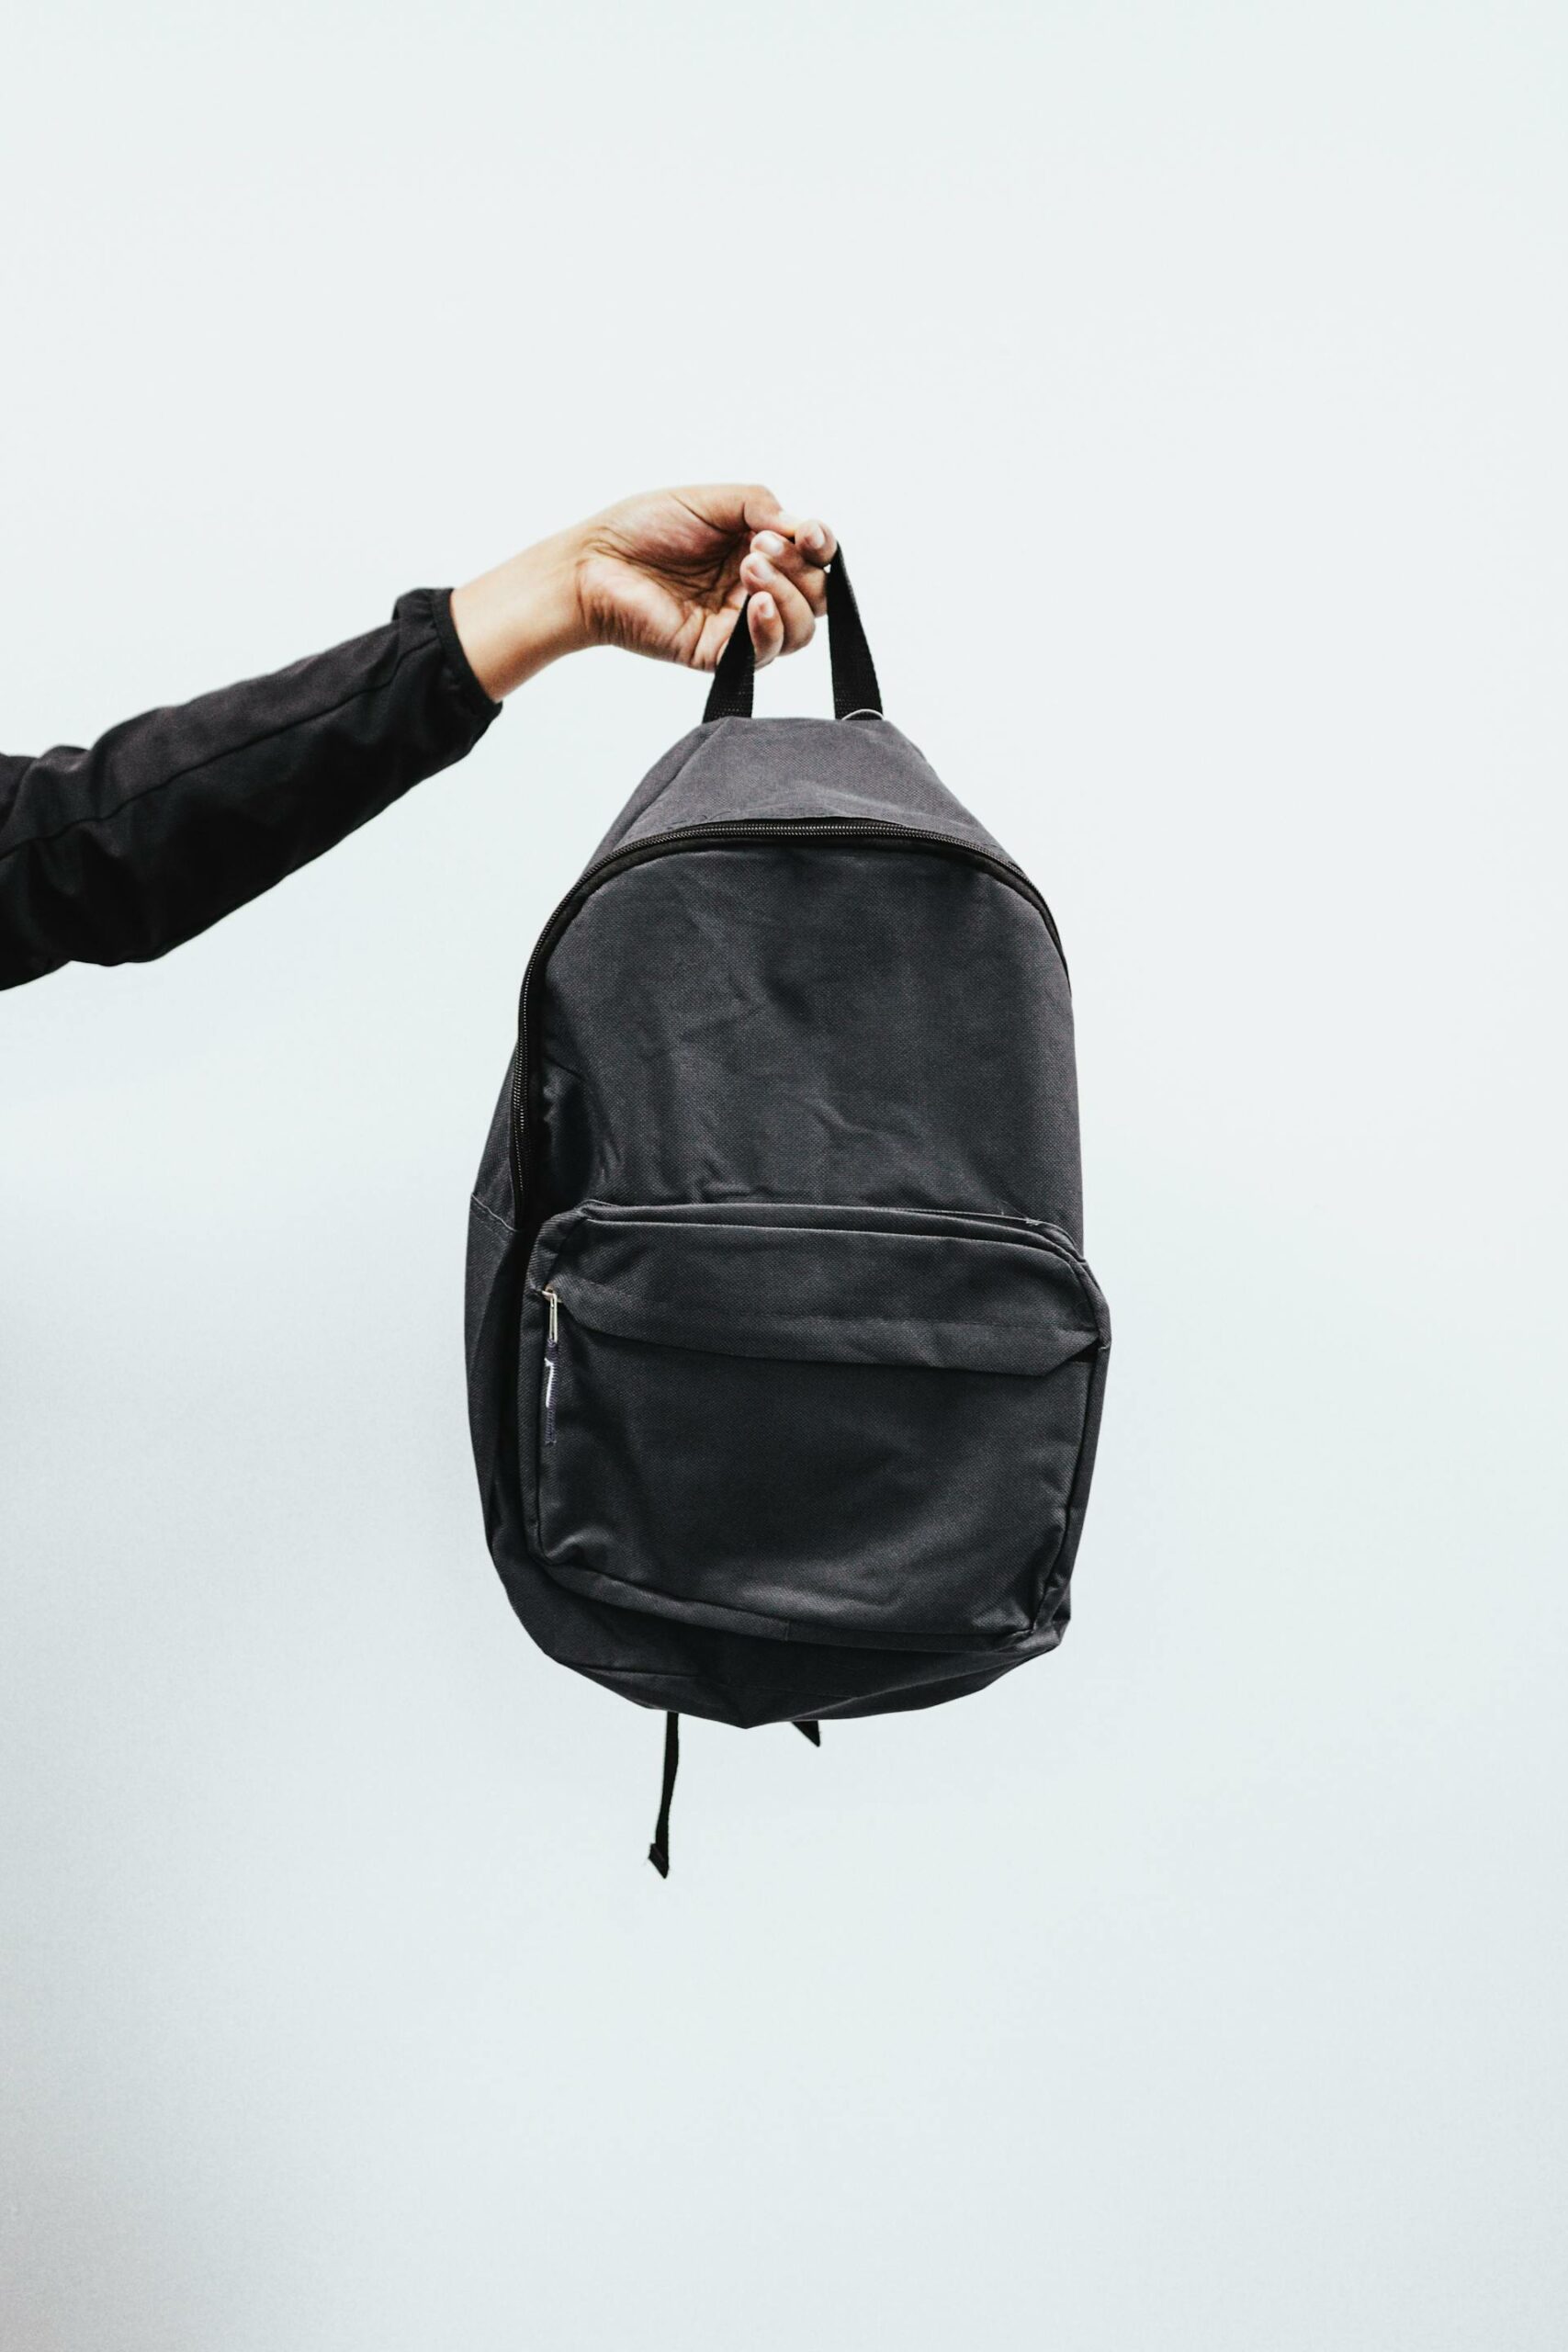 10 Packable Backpacks for Minimalist Travel